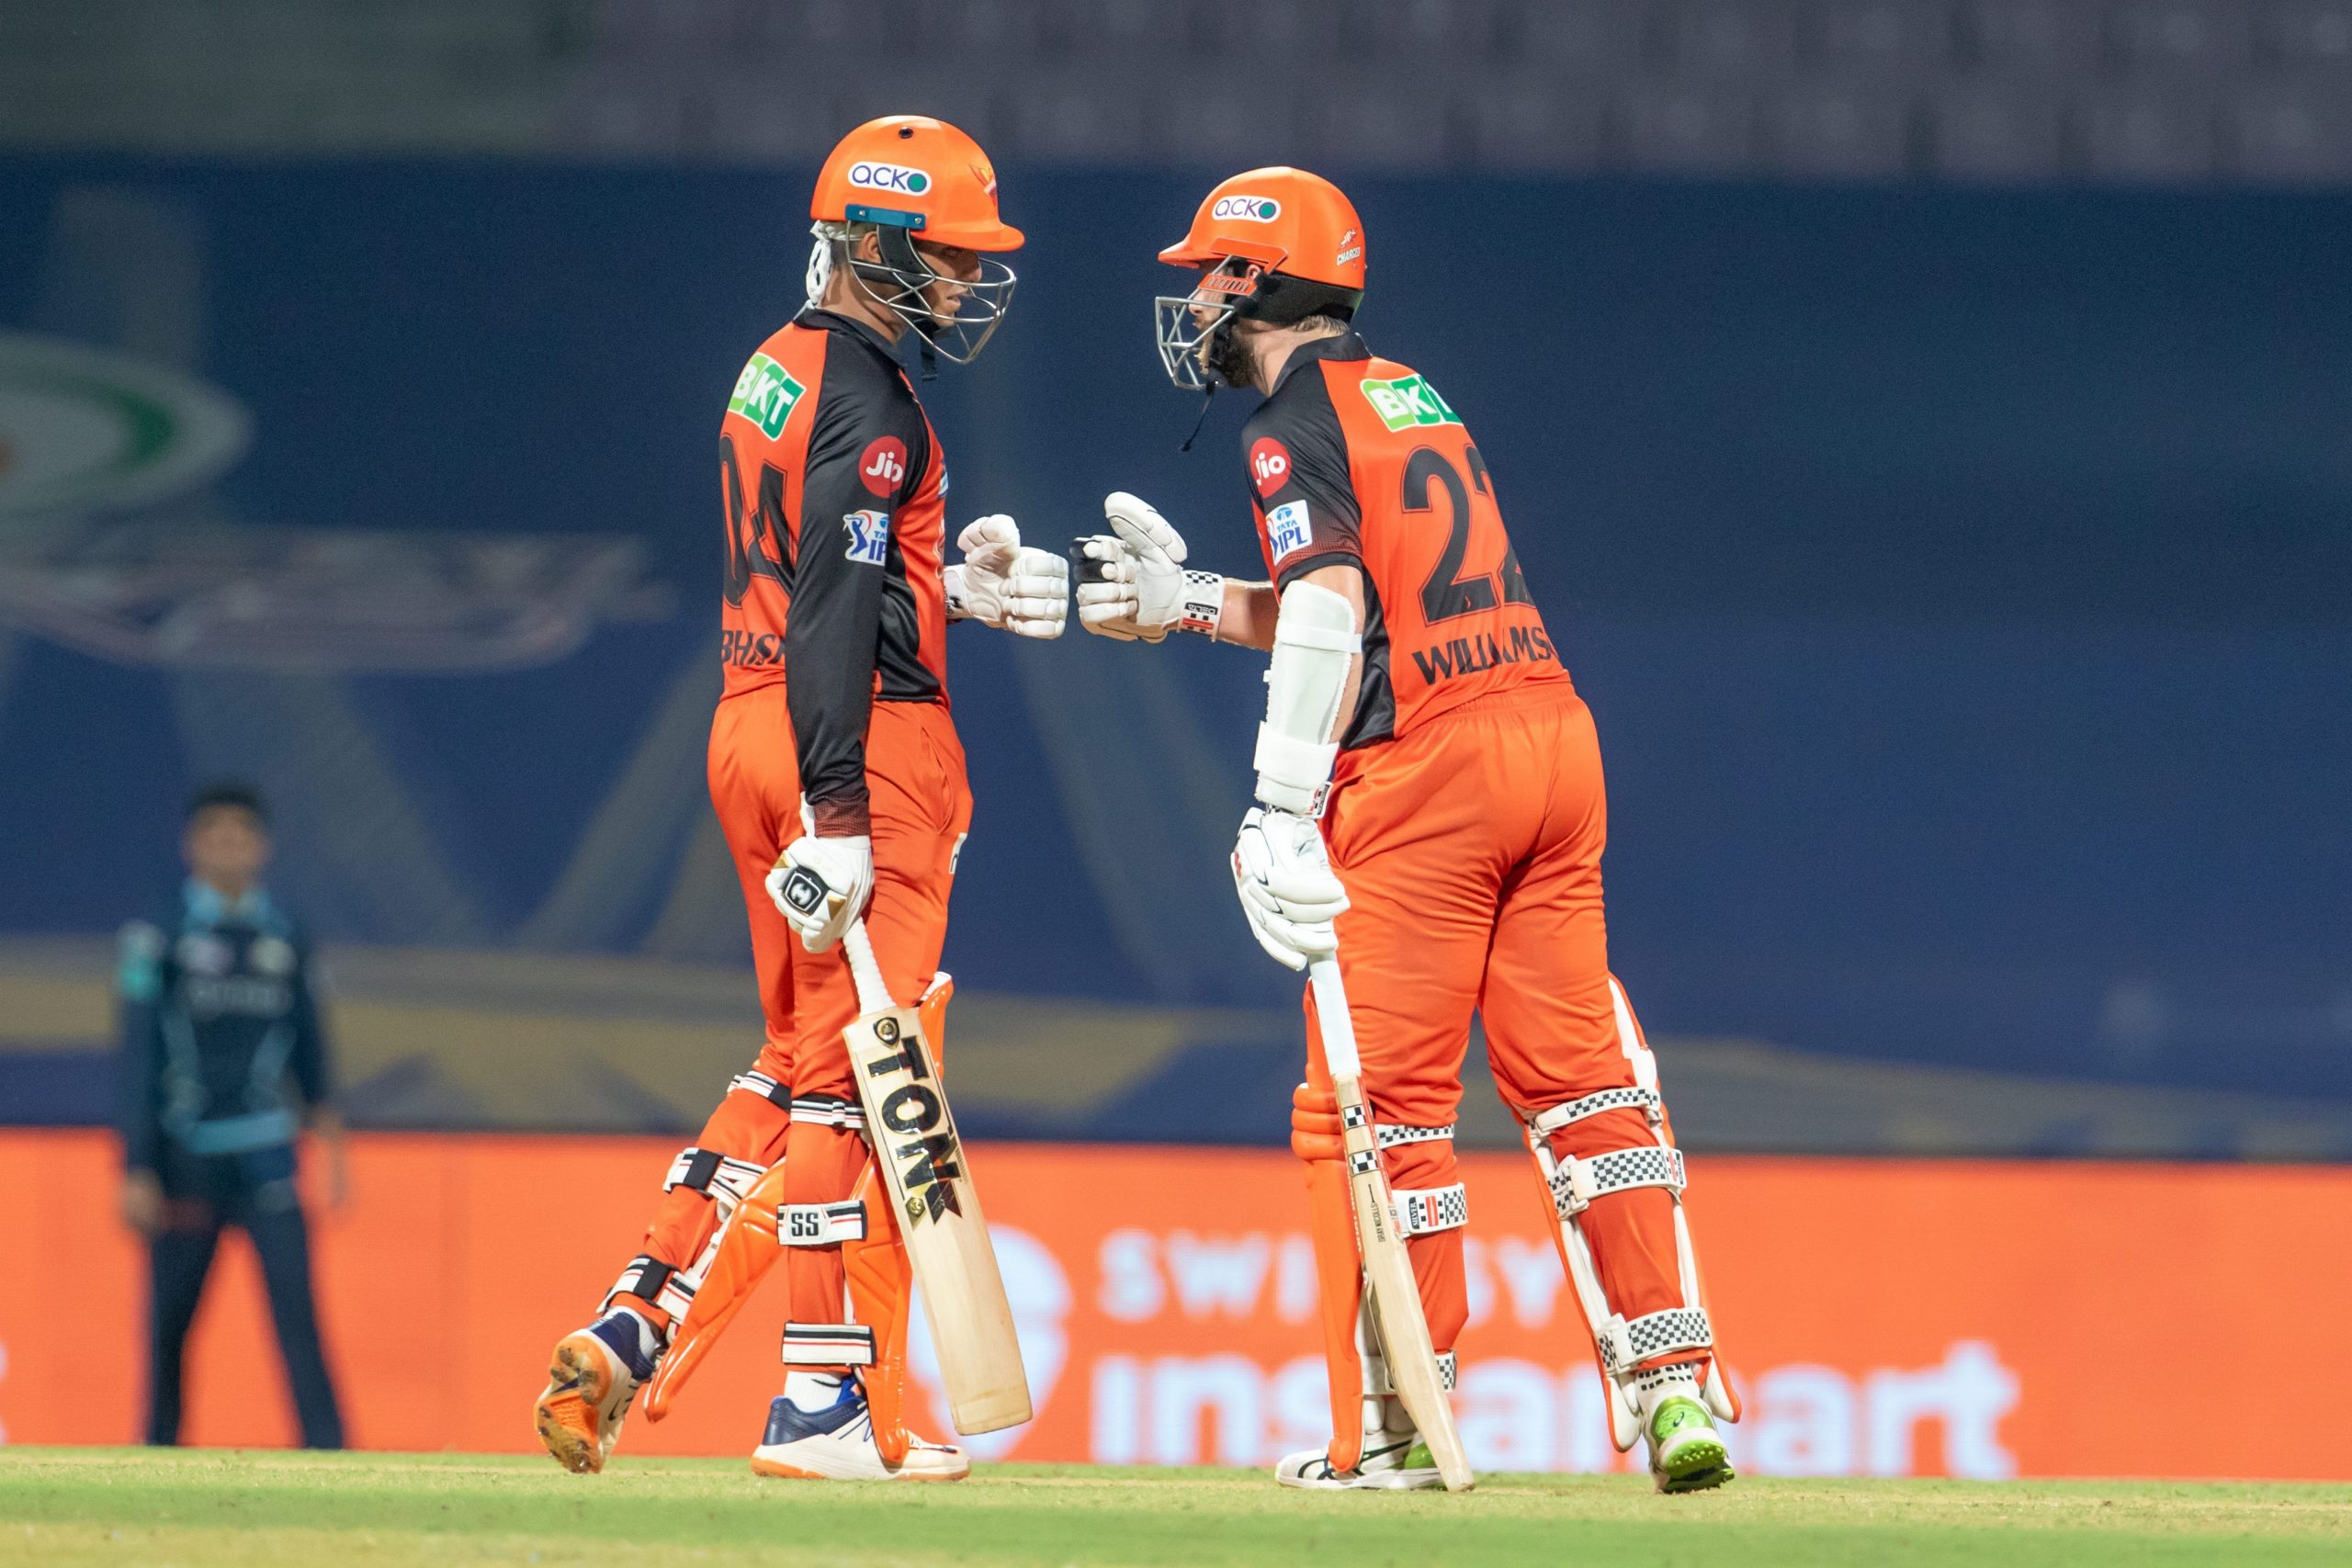 IPL 2022: Kane Williamson says SRH needs to focus on upcoming challenges after decimating RCB